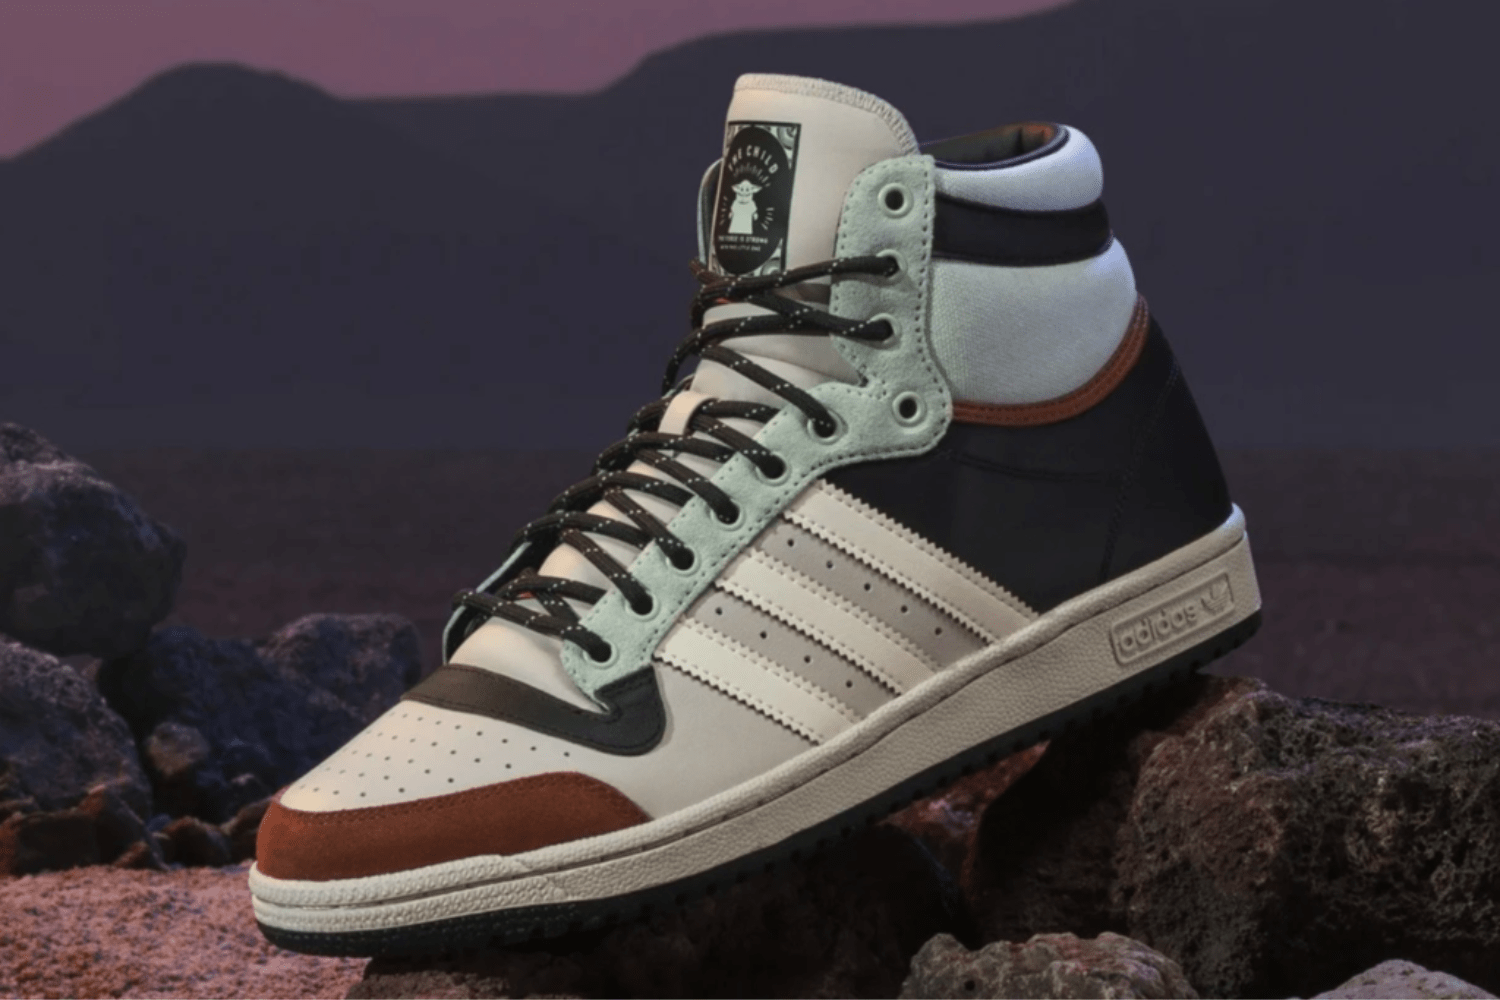 Celebrate Star Wars Day with these special sneakers